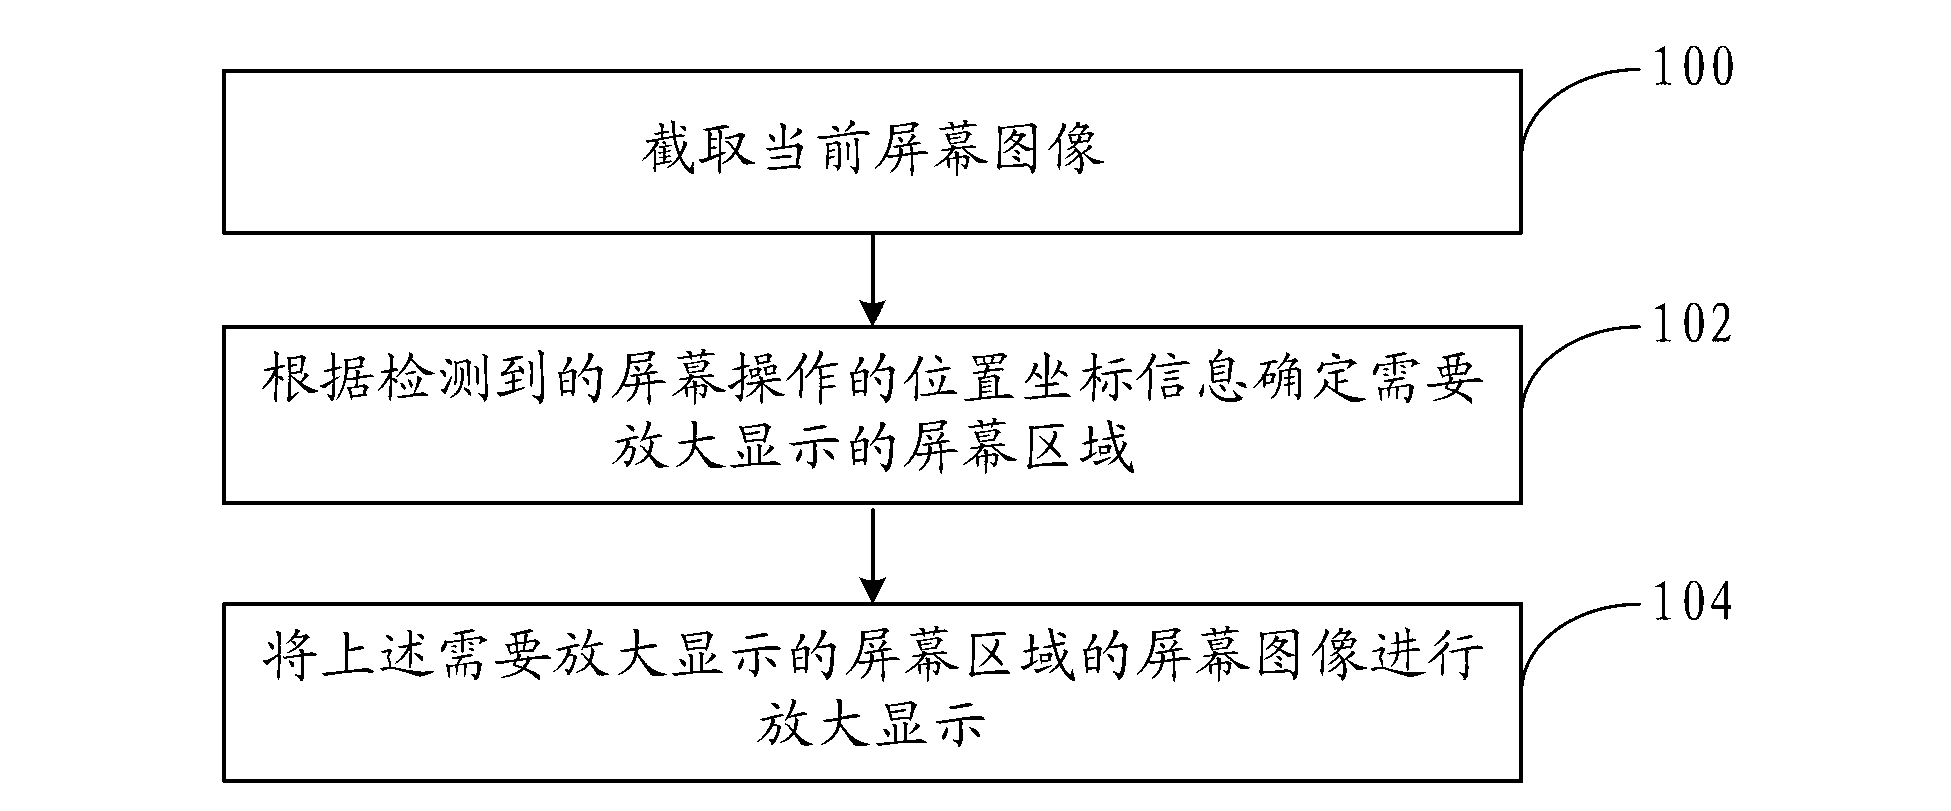 Image magnification display method and device